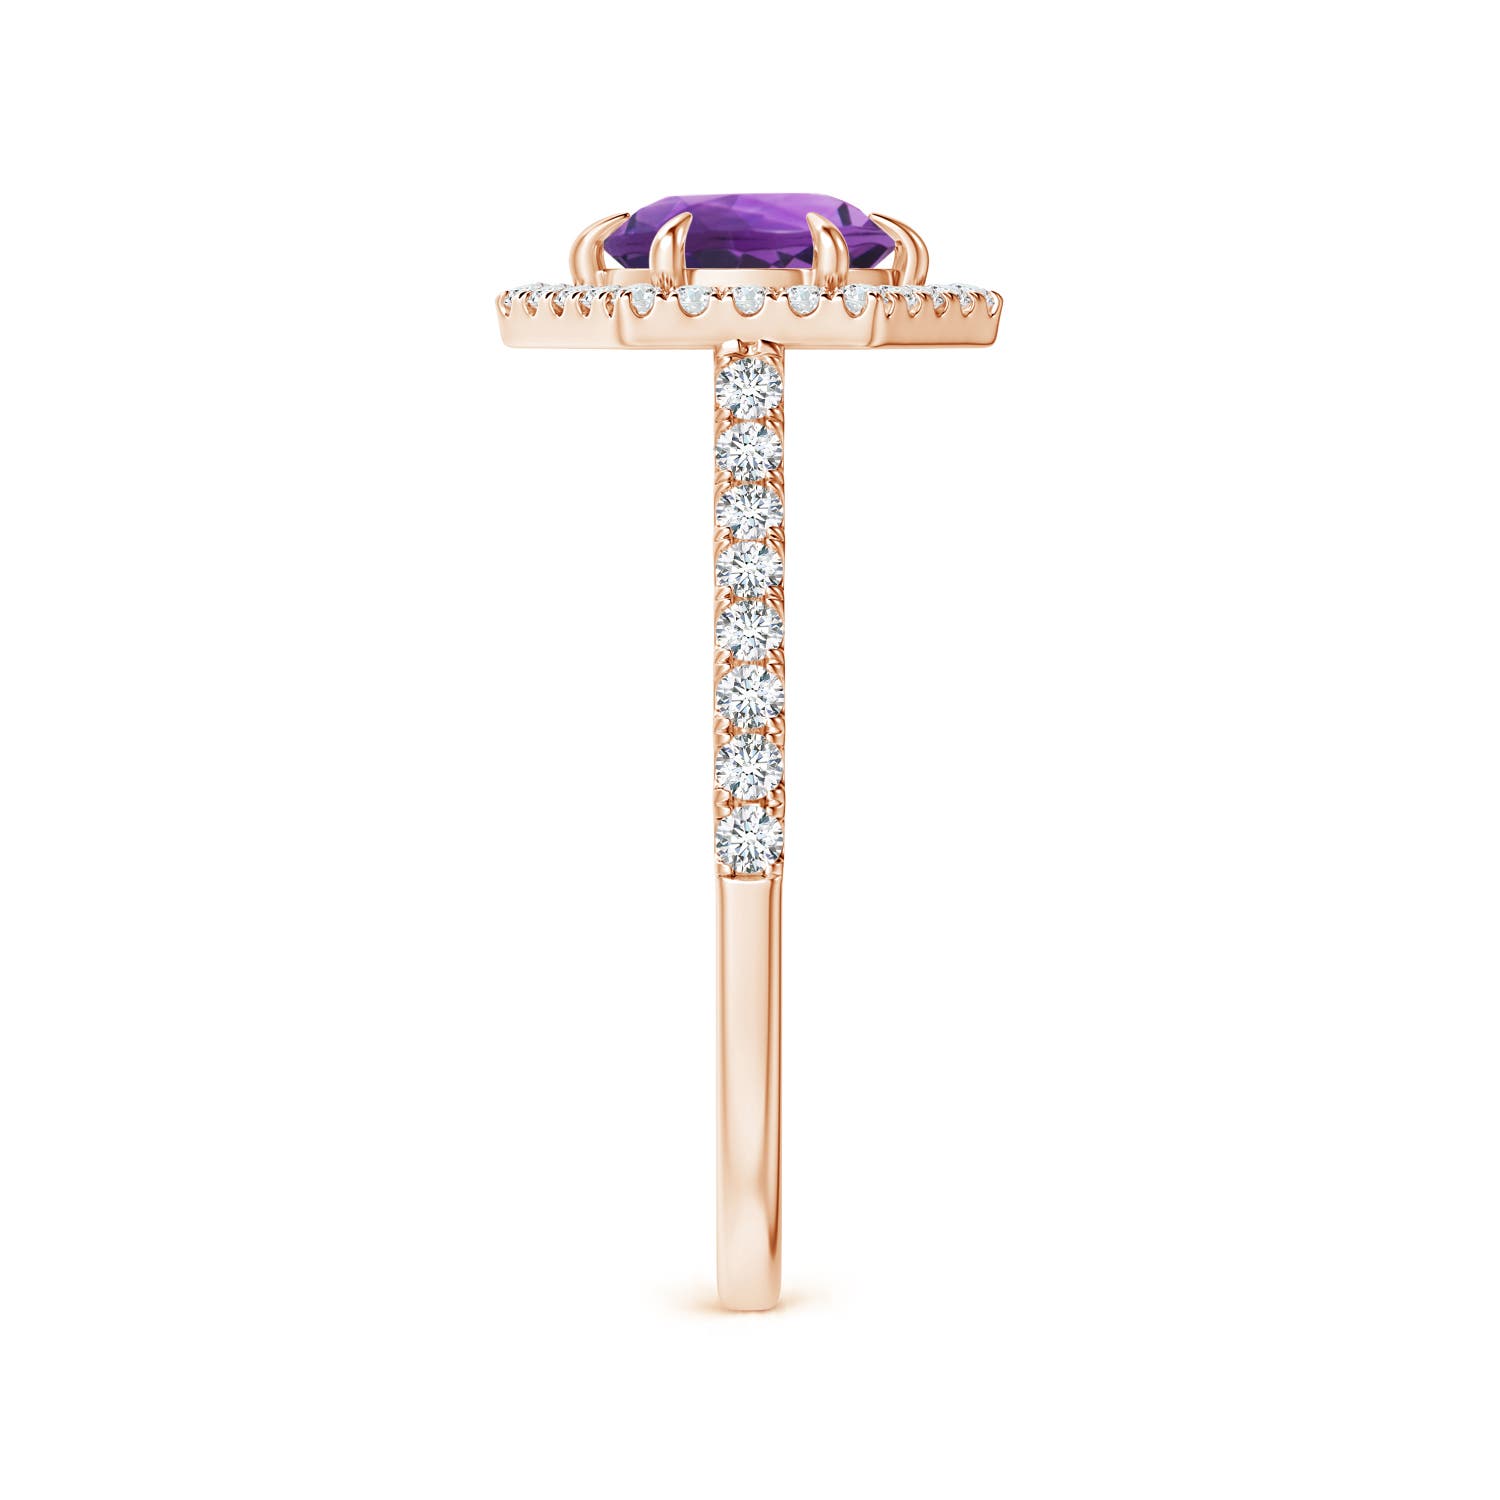 AAA - Amethyst / 1.14 CT / 14 KT Rose Gold